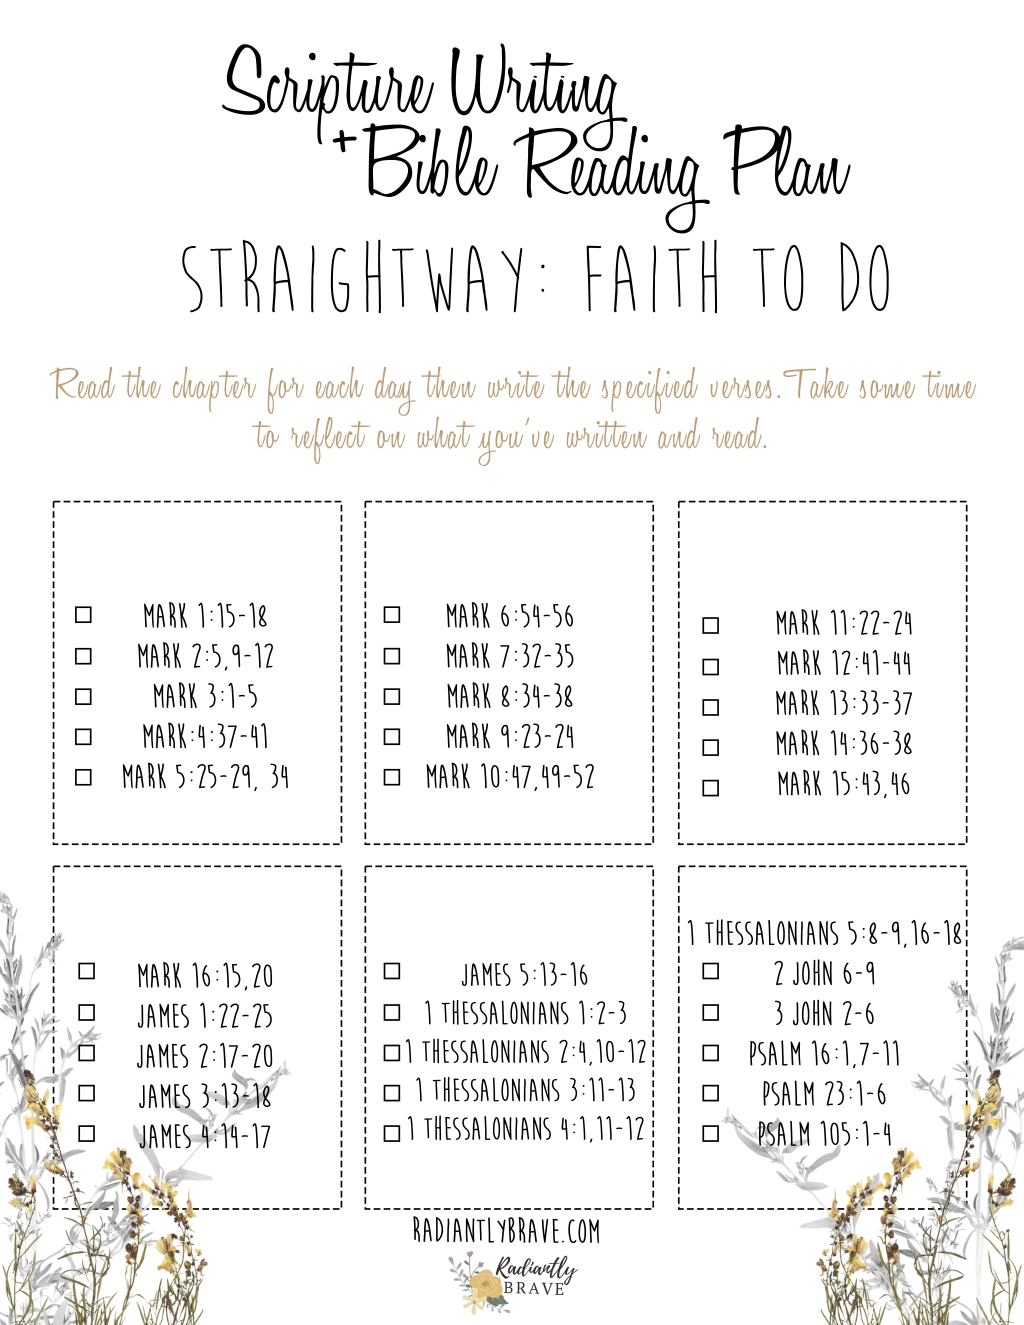 Scripture Writing Plan – Straightway: Faith to Do